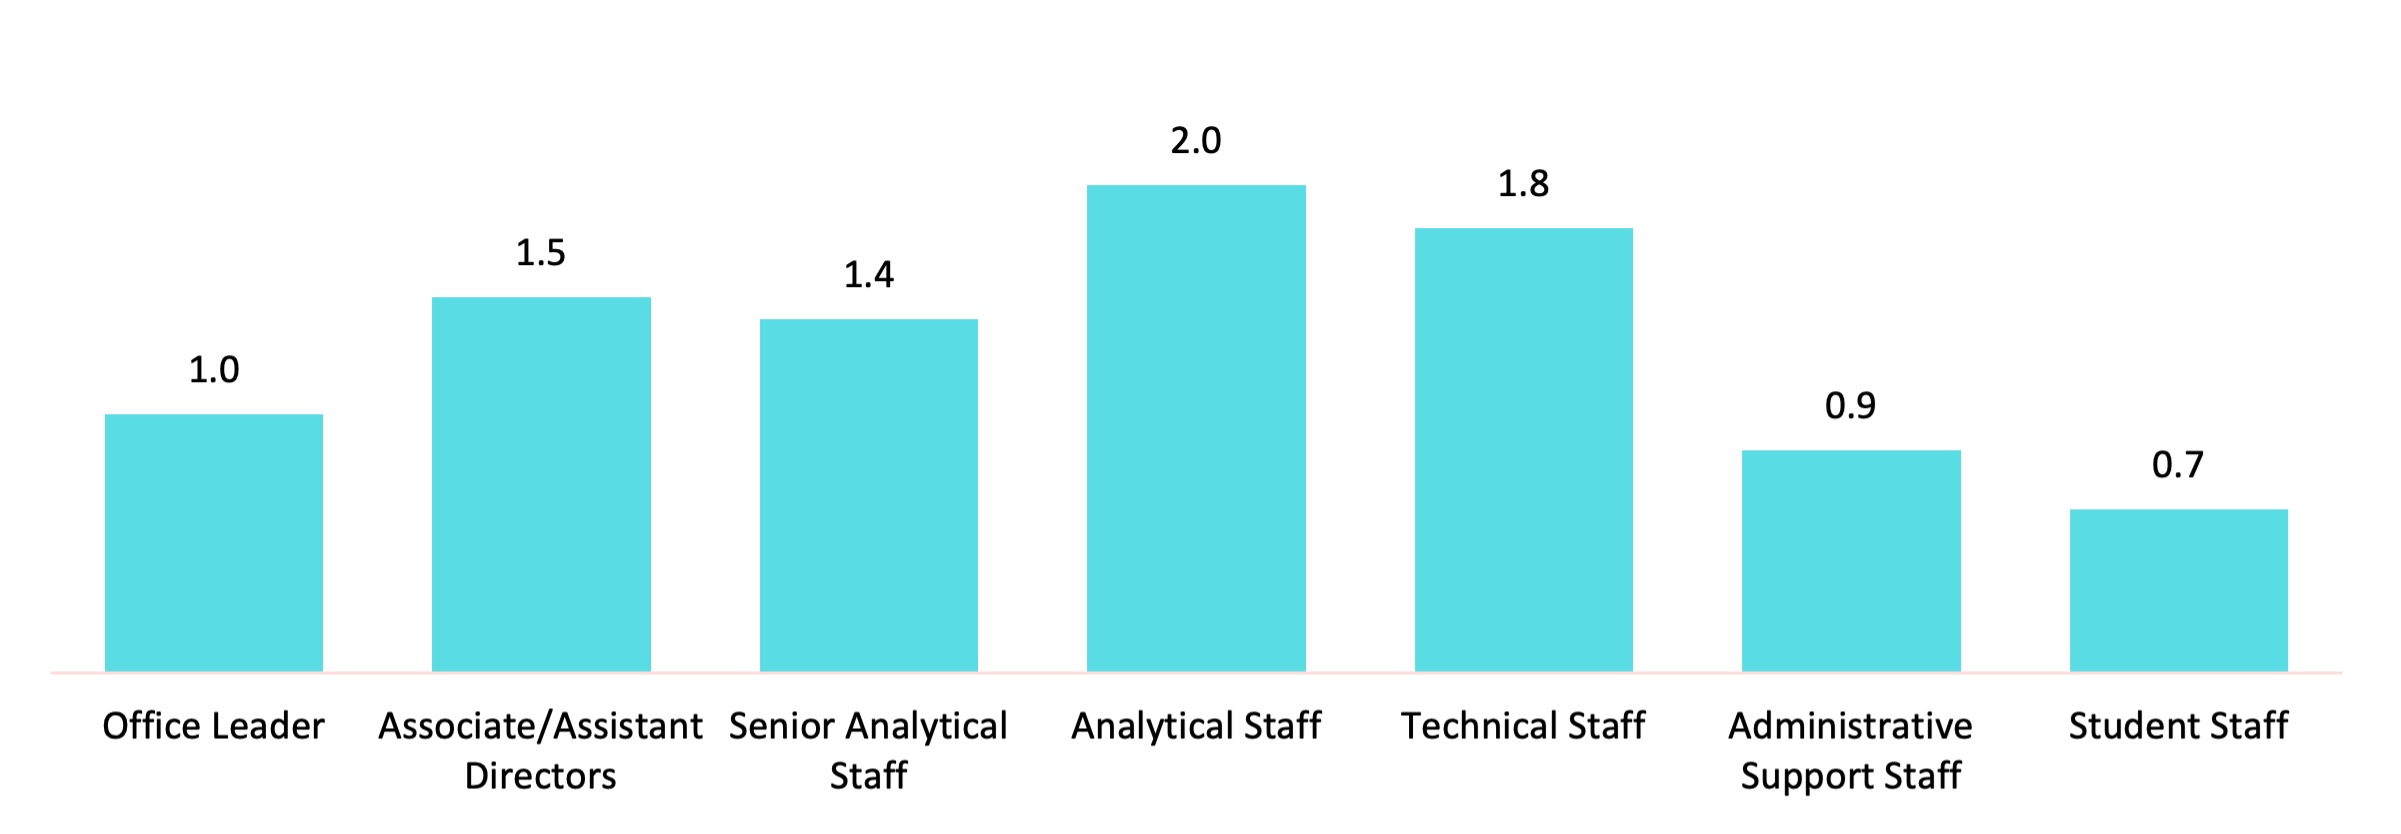 Chart 1 - Average FTE by Staff Role